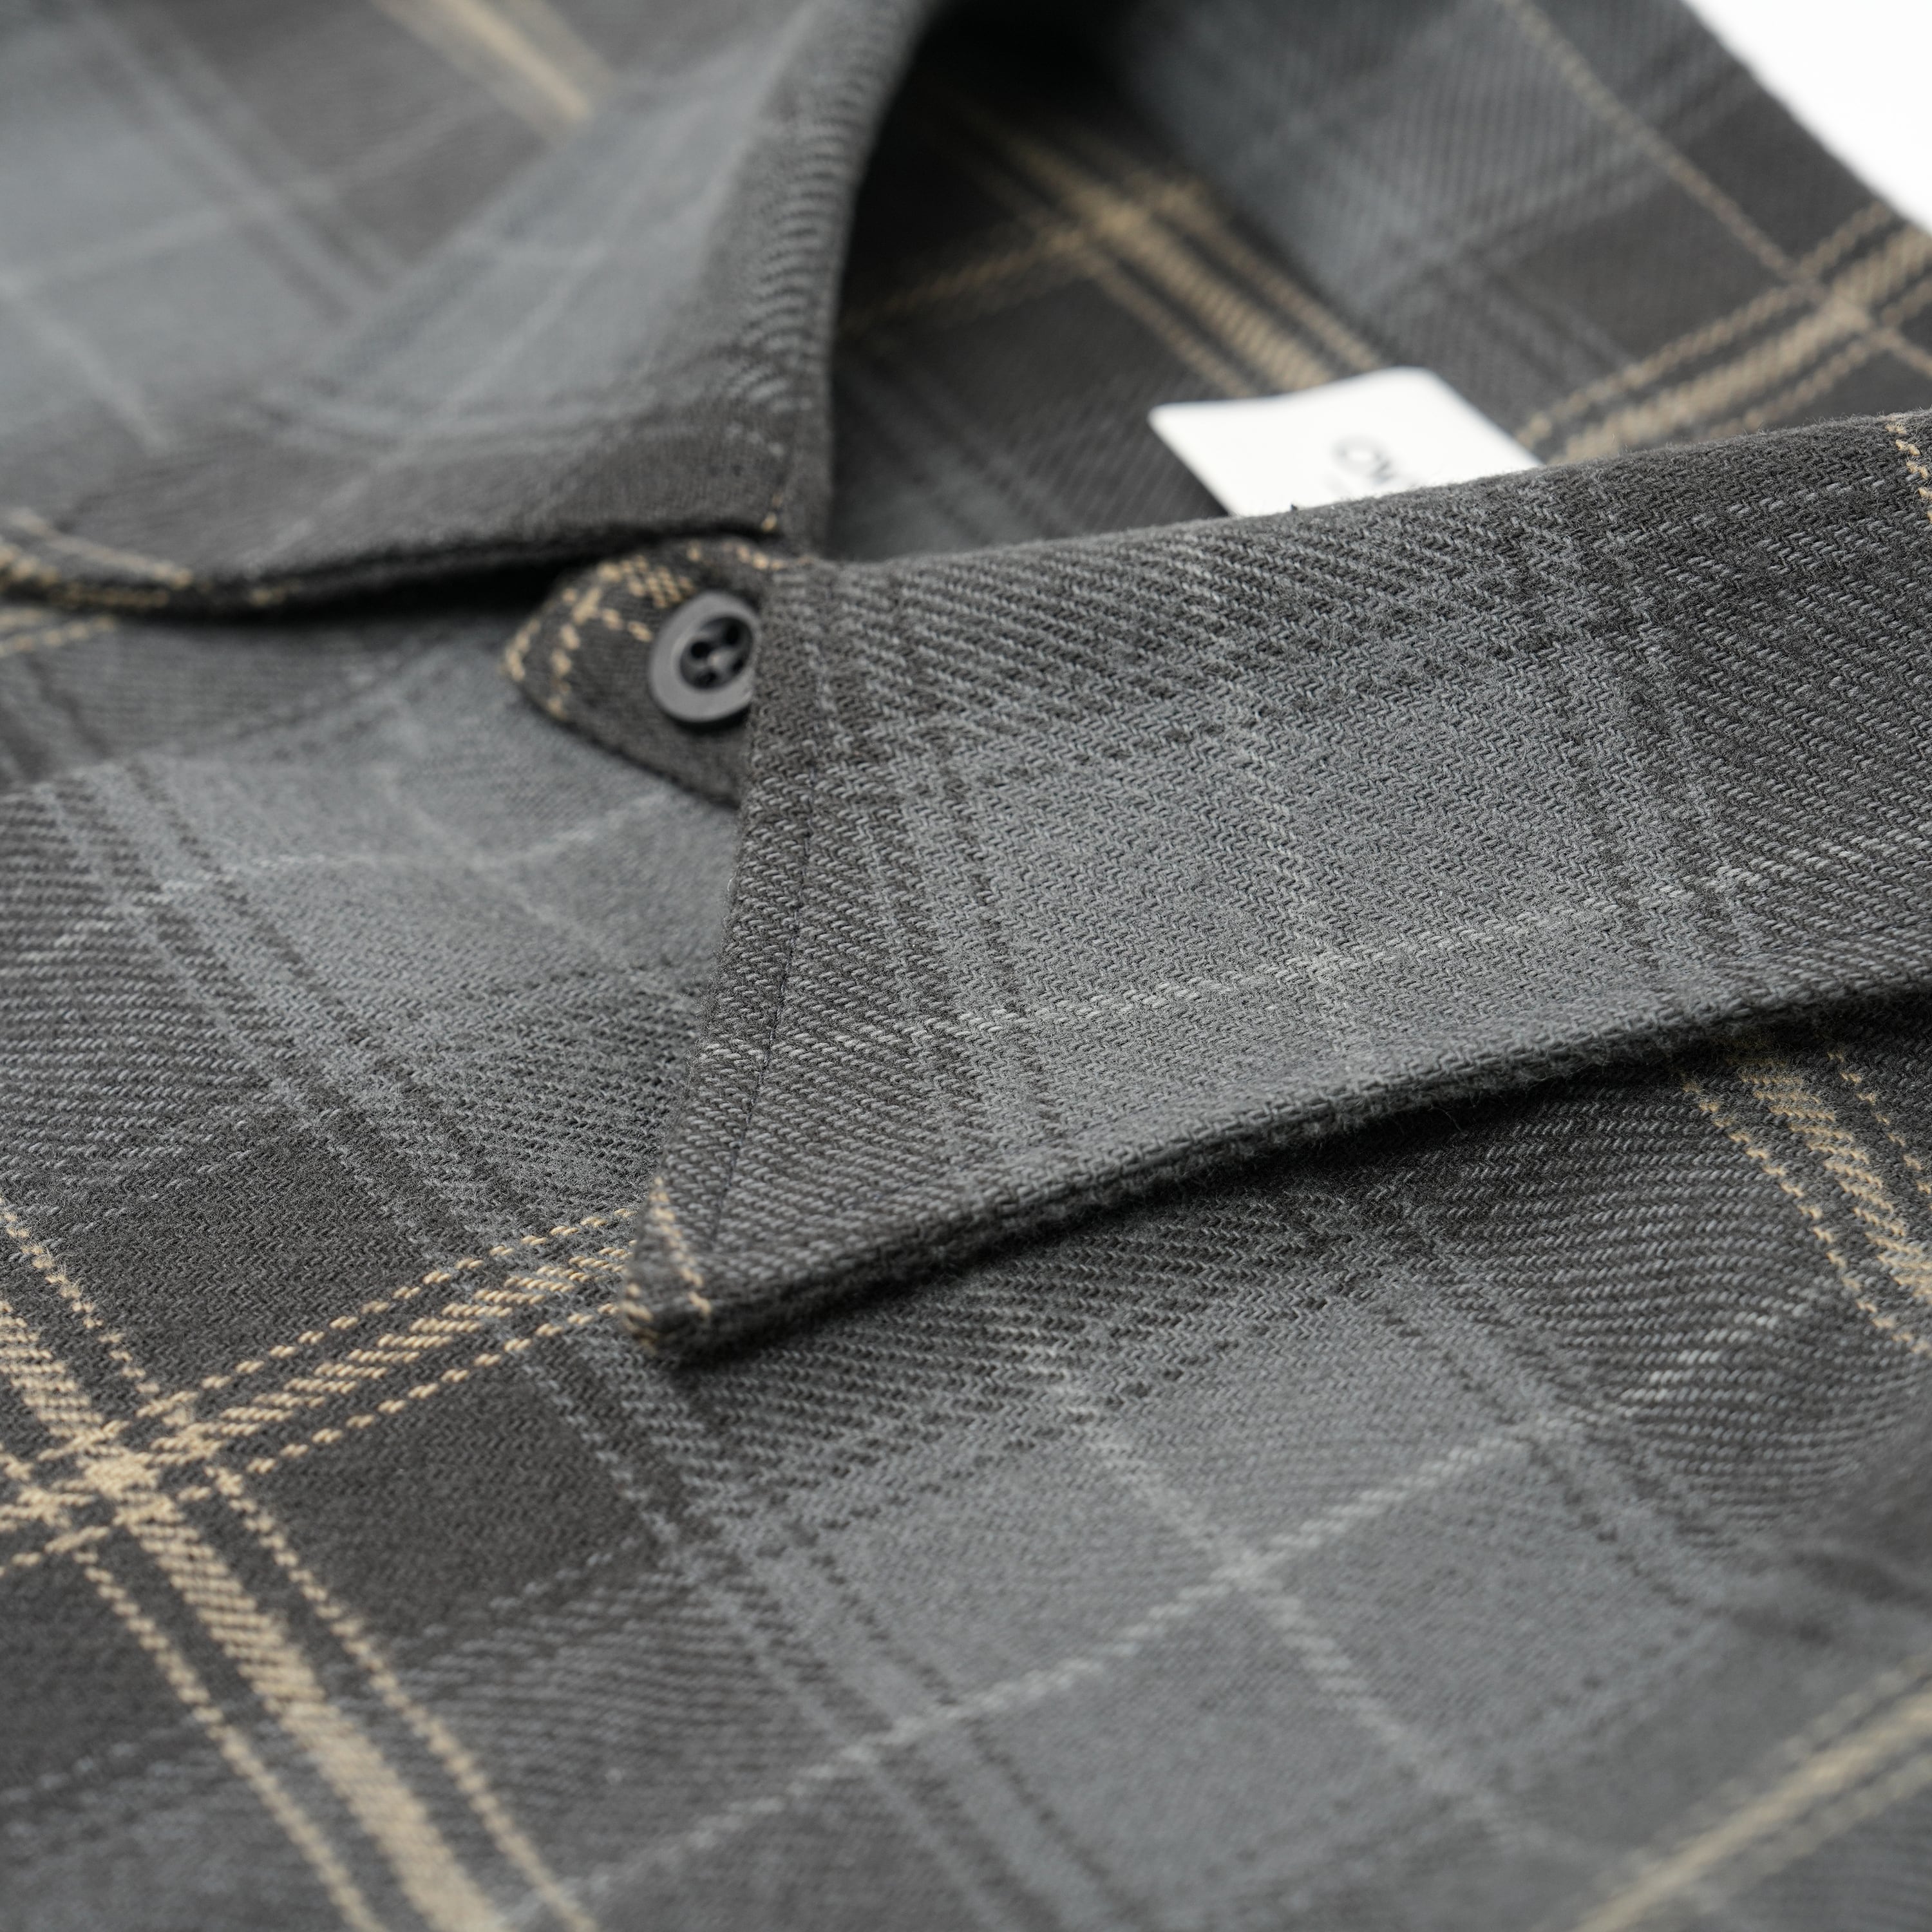 Heavy Flannel Check Shirts | OVY